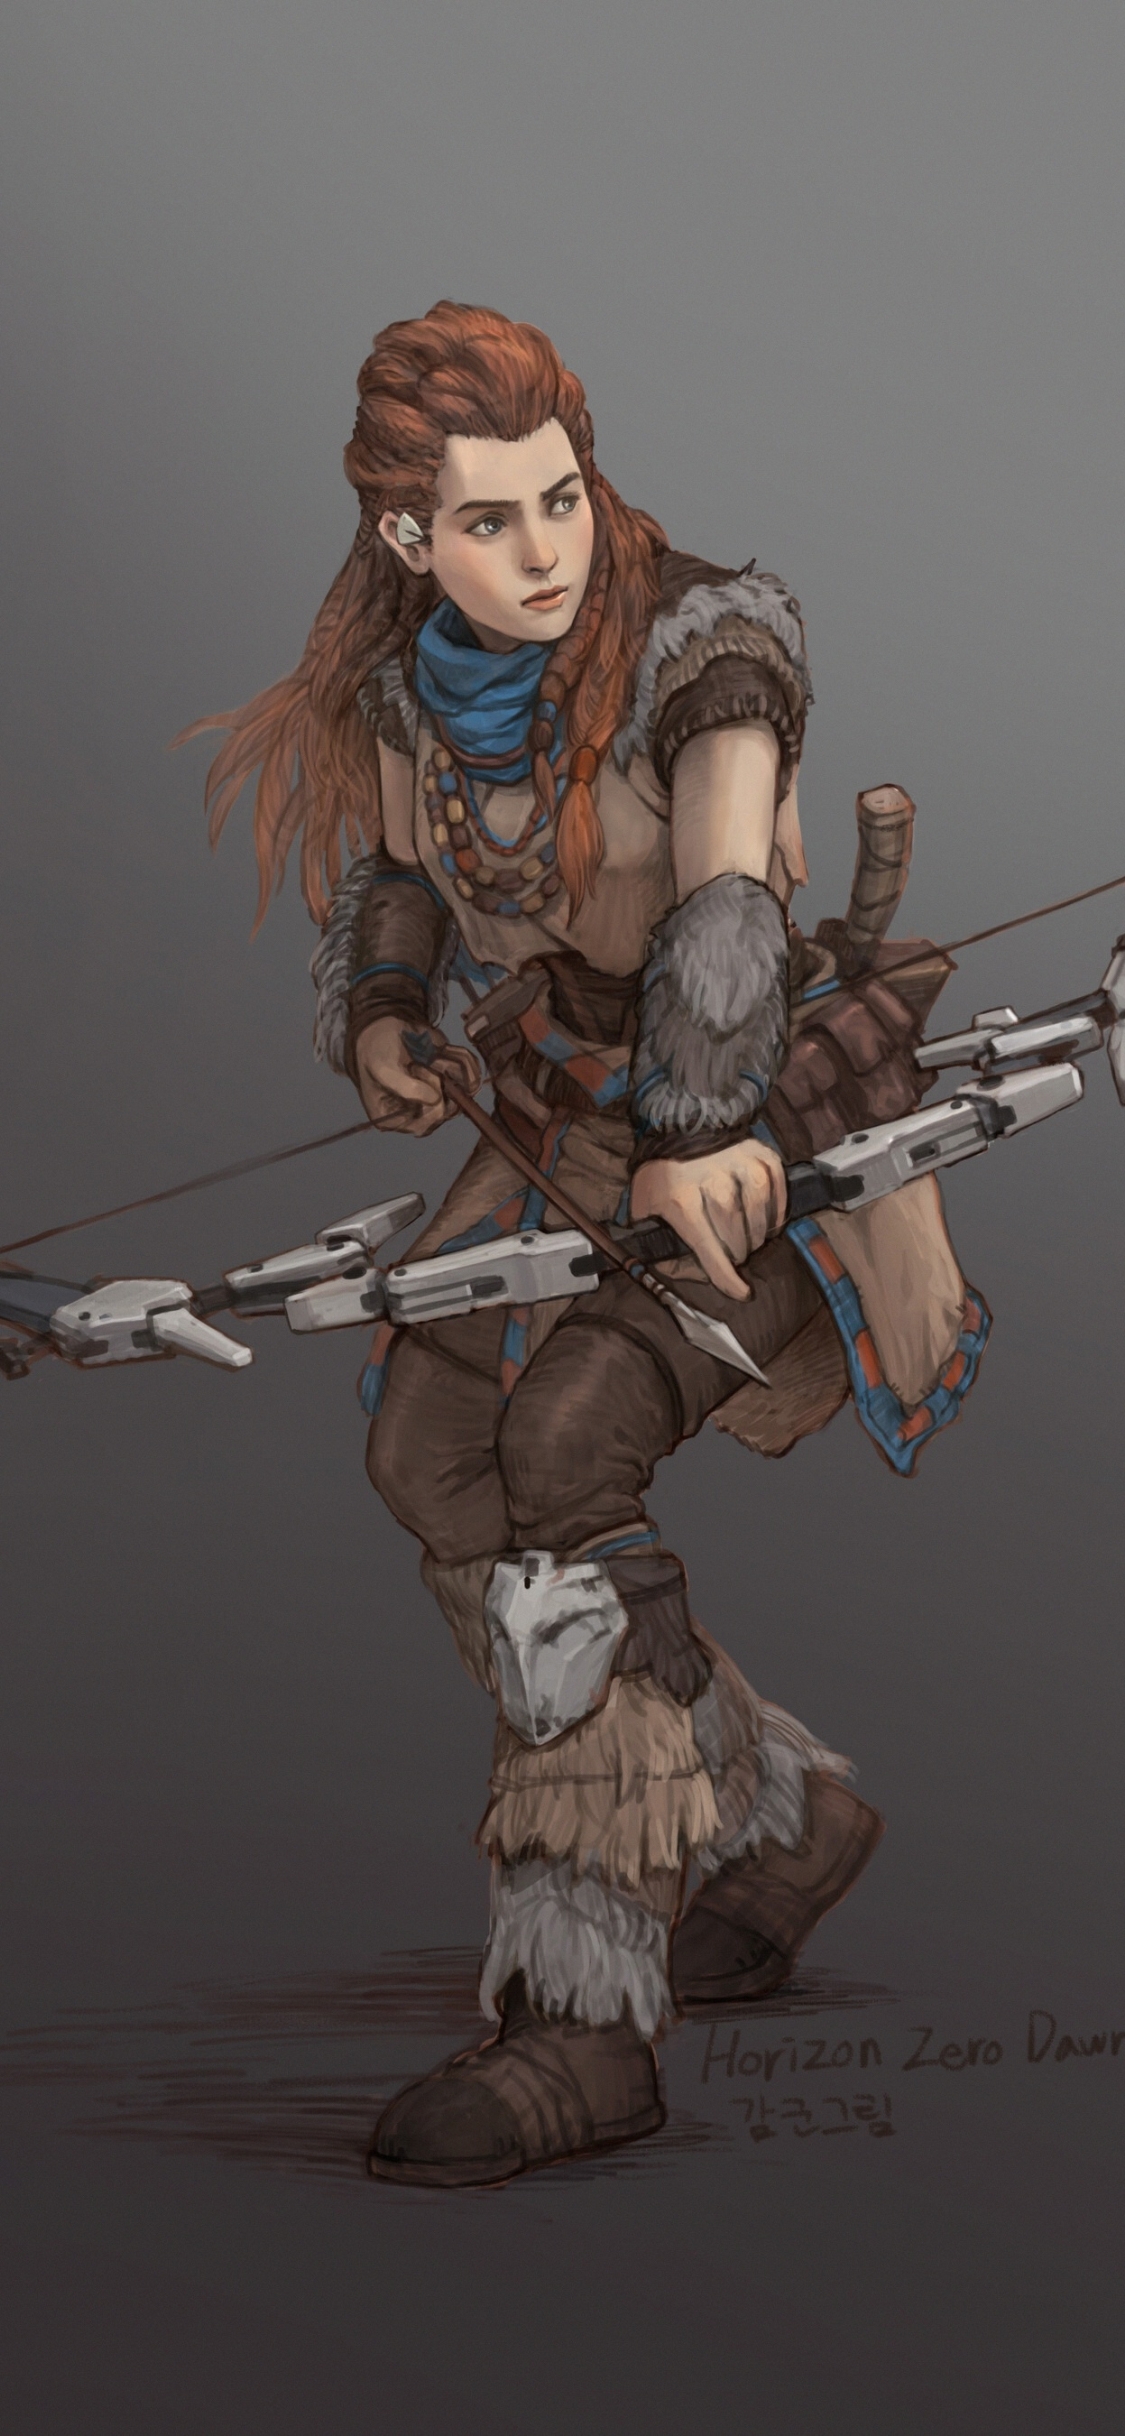 1125x2436 Aloy In Horizon Zero Dawn Iphone Xs Iphone 10 Iphone X Wallpaper Hd Games 4k Wallpapers Images Photos And Background Wallpapers Den